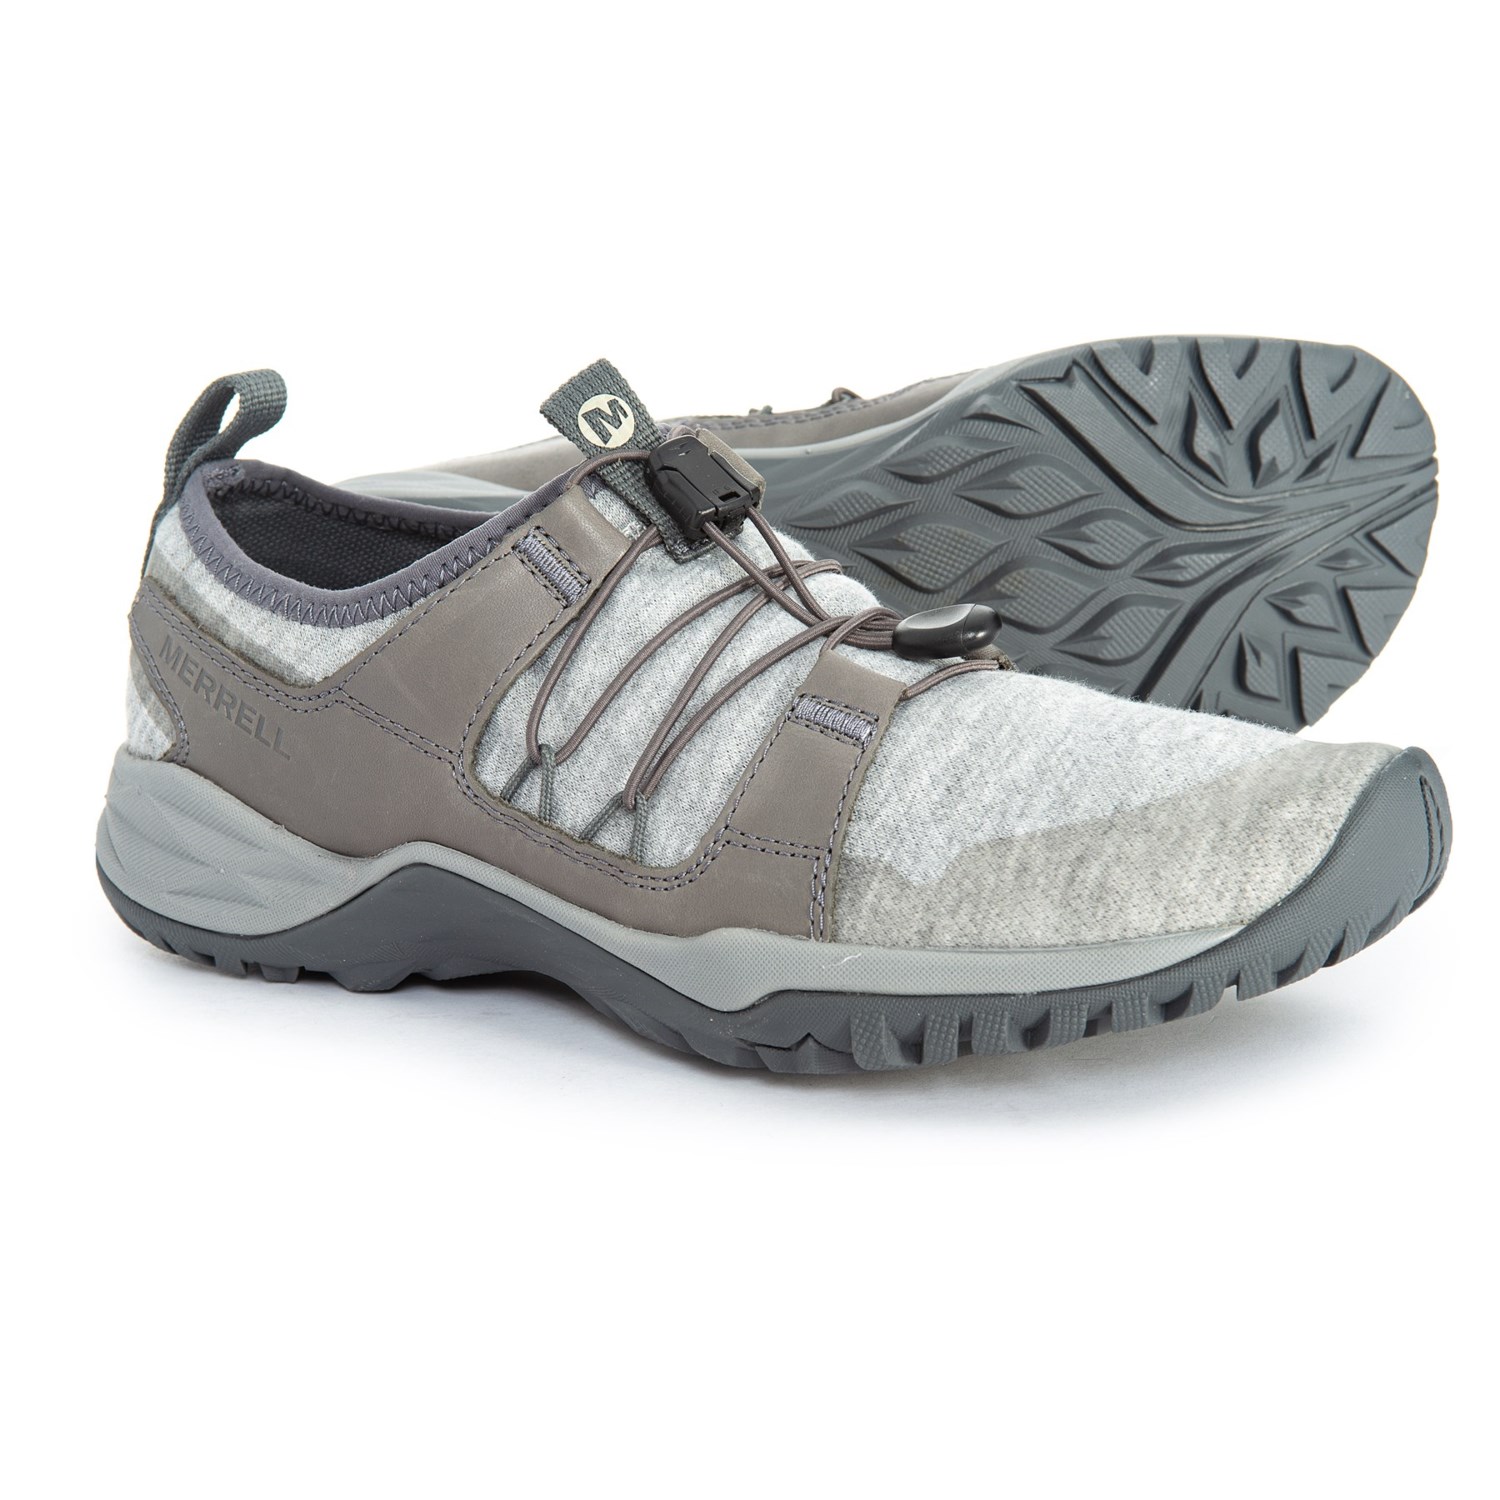 Merrell shoes for kids from $7, adults from $22 - Clark Deals